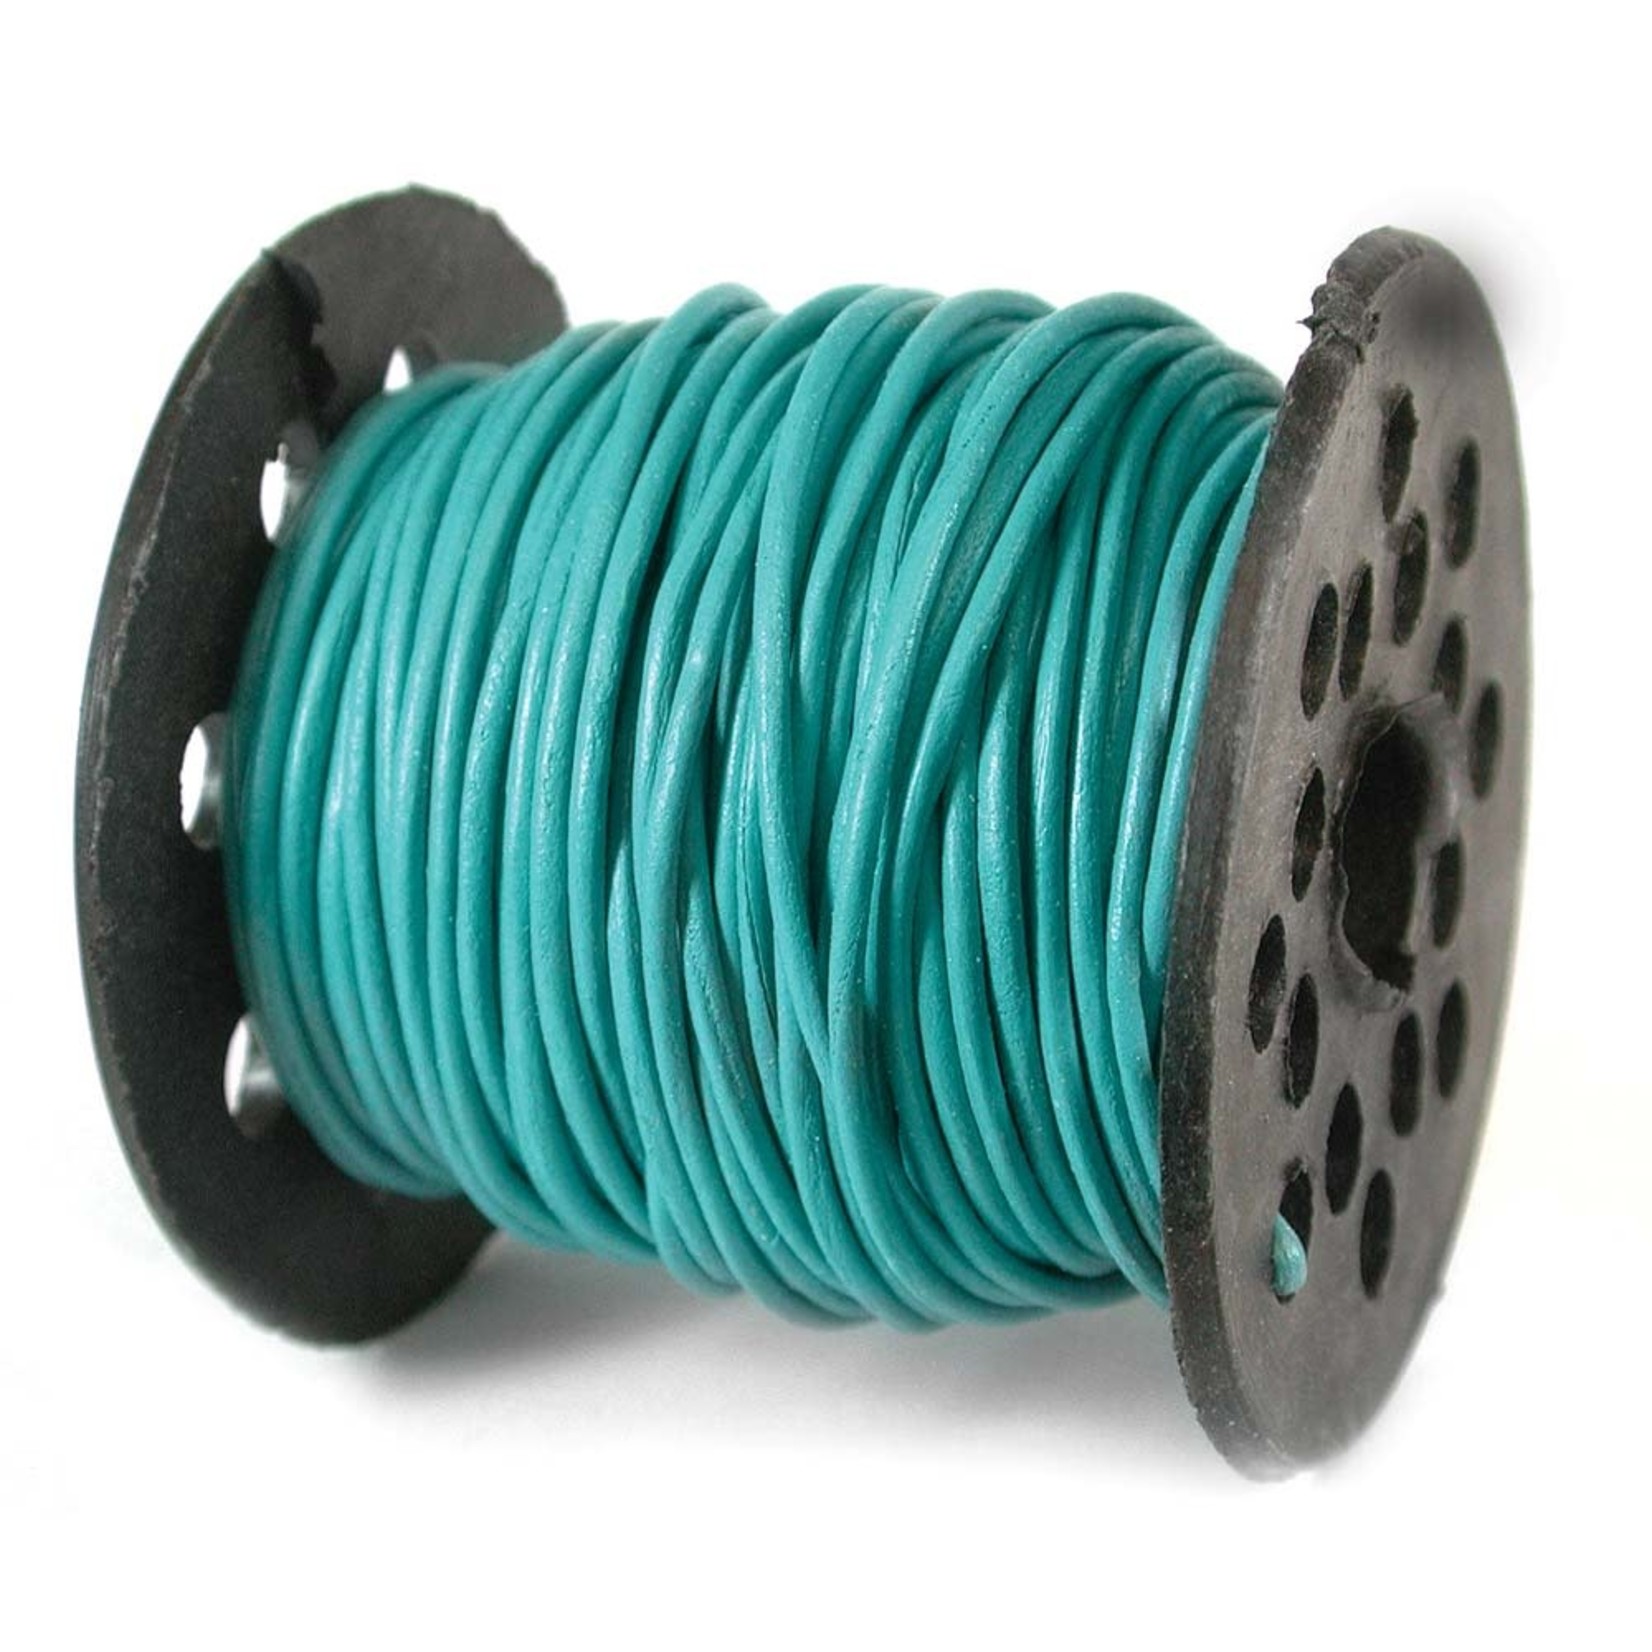 Leather Cord 1mm Round Cord Turquoise - 1 foot